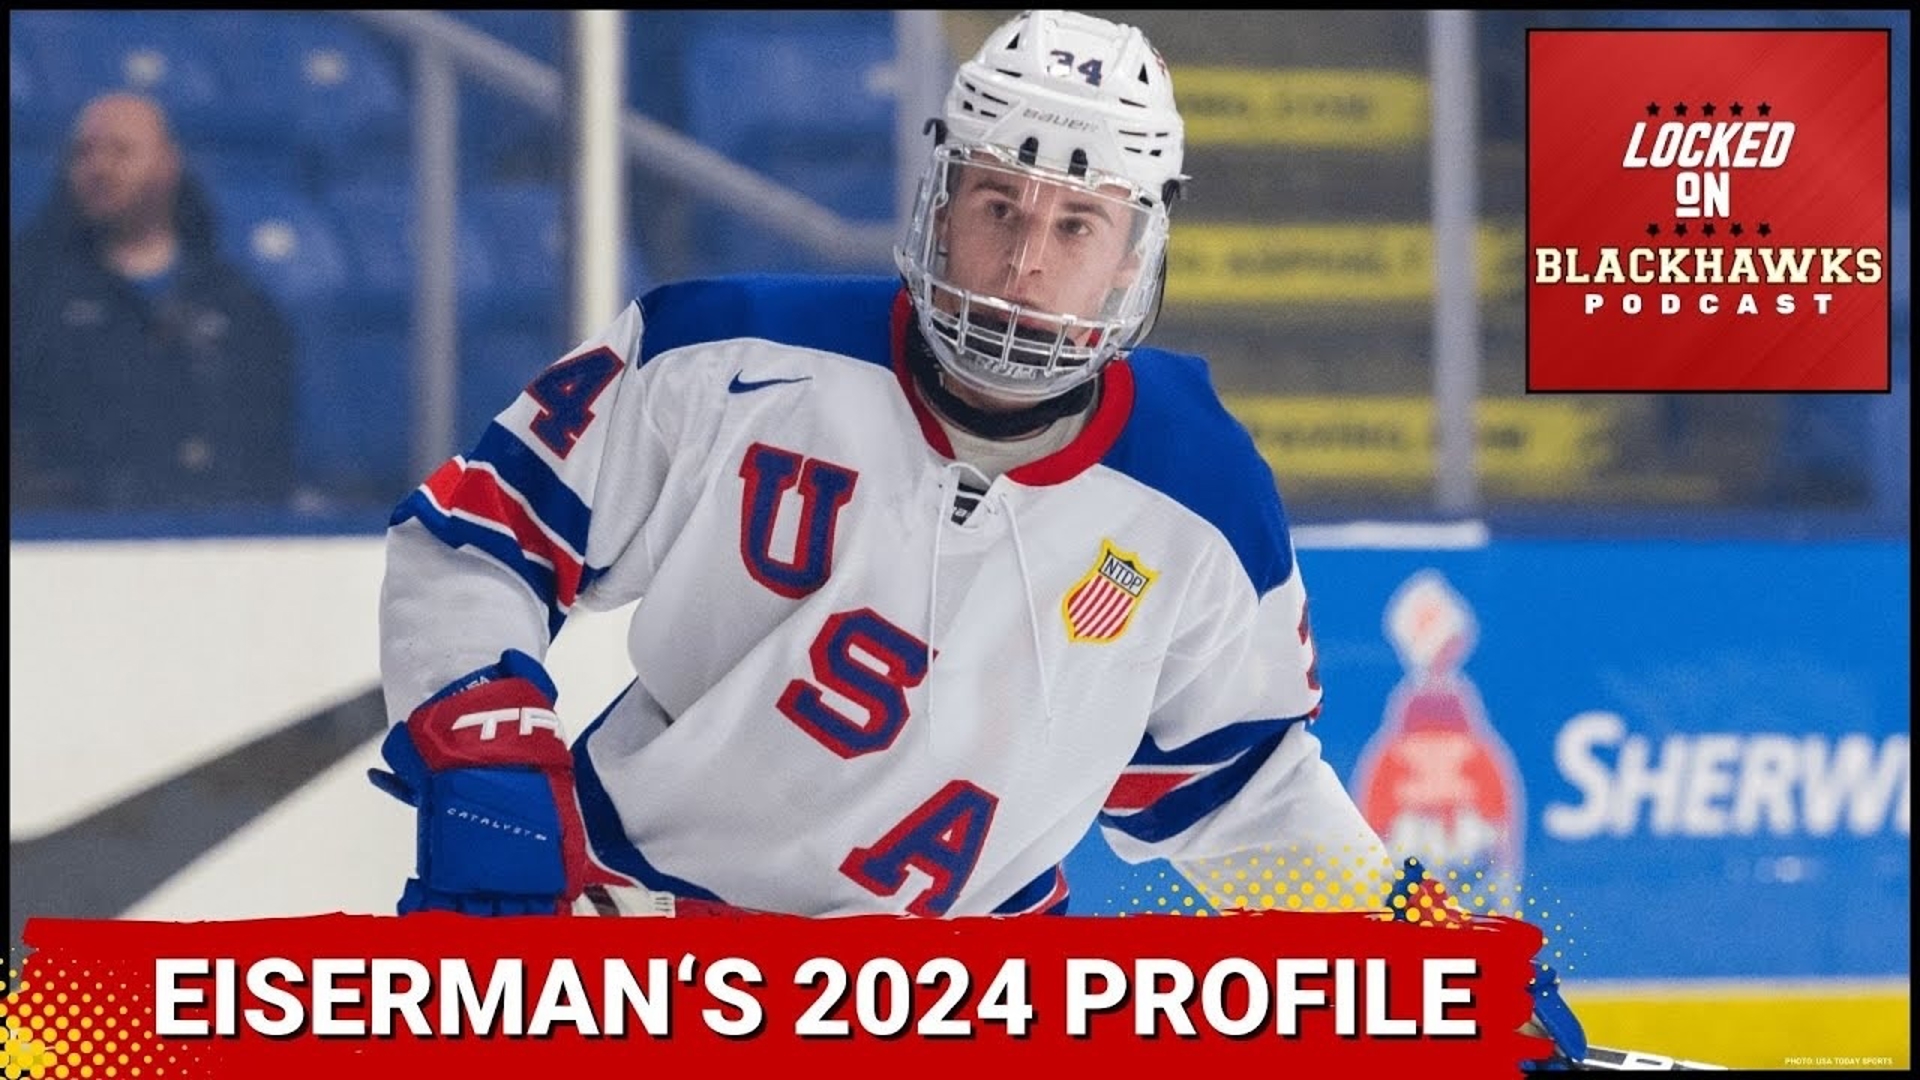 Wednesday's episode begins with 17-year-old forward Cole Eiserman's 2024 NHL Draft Profile!